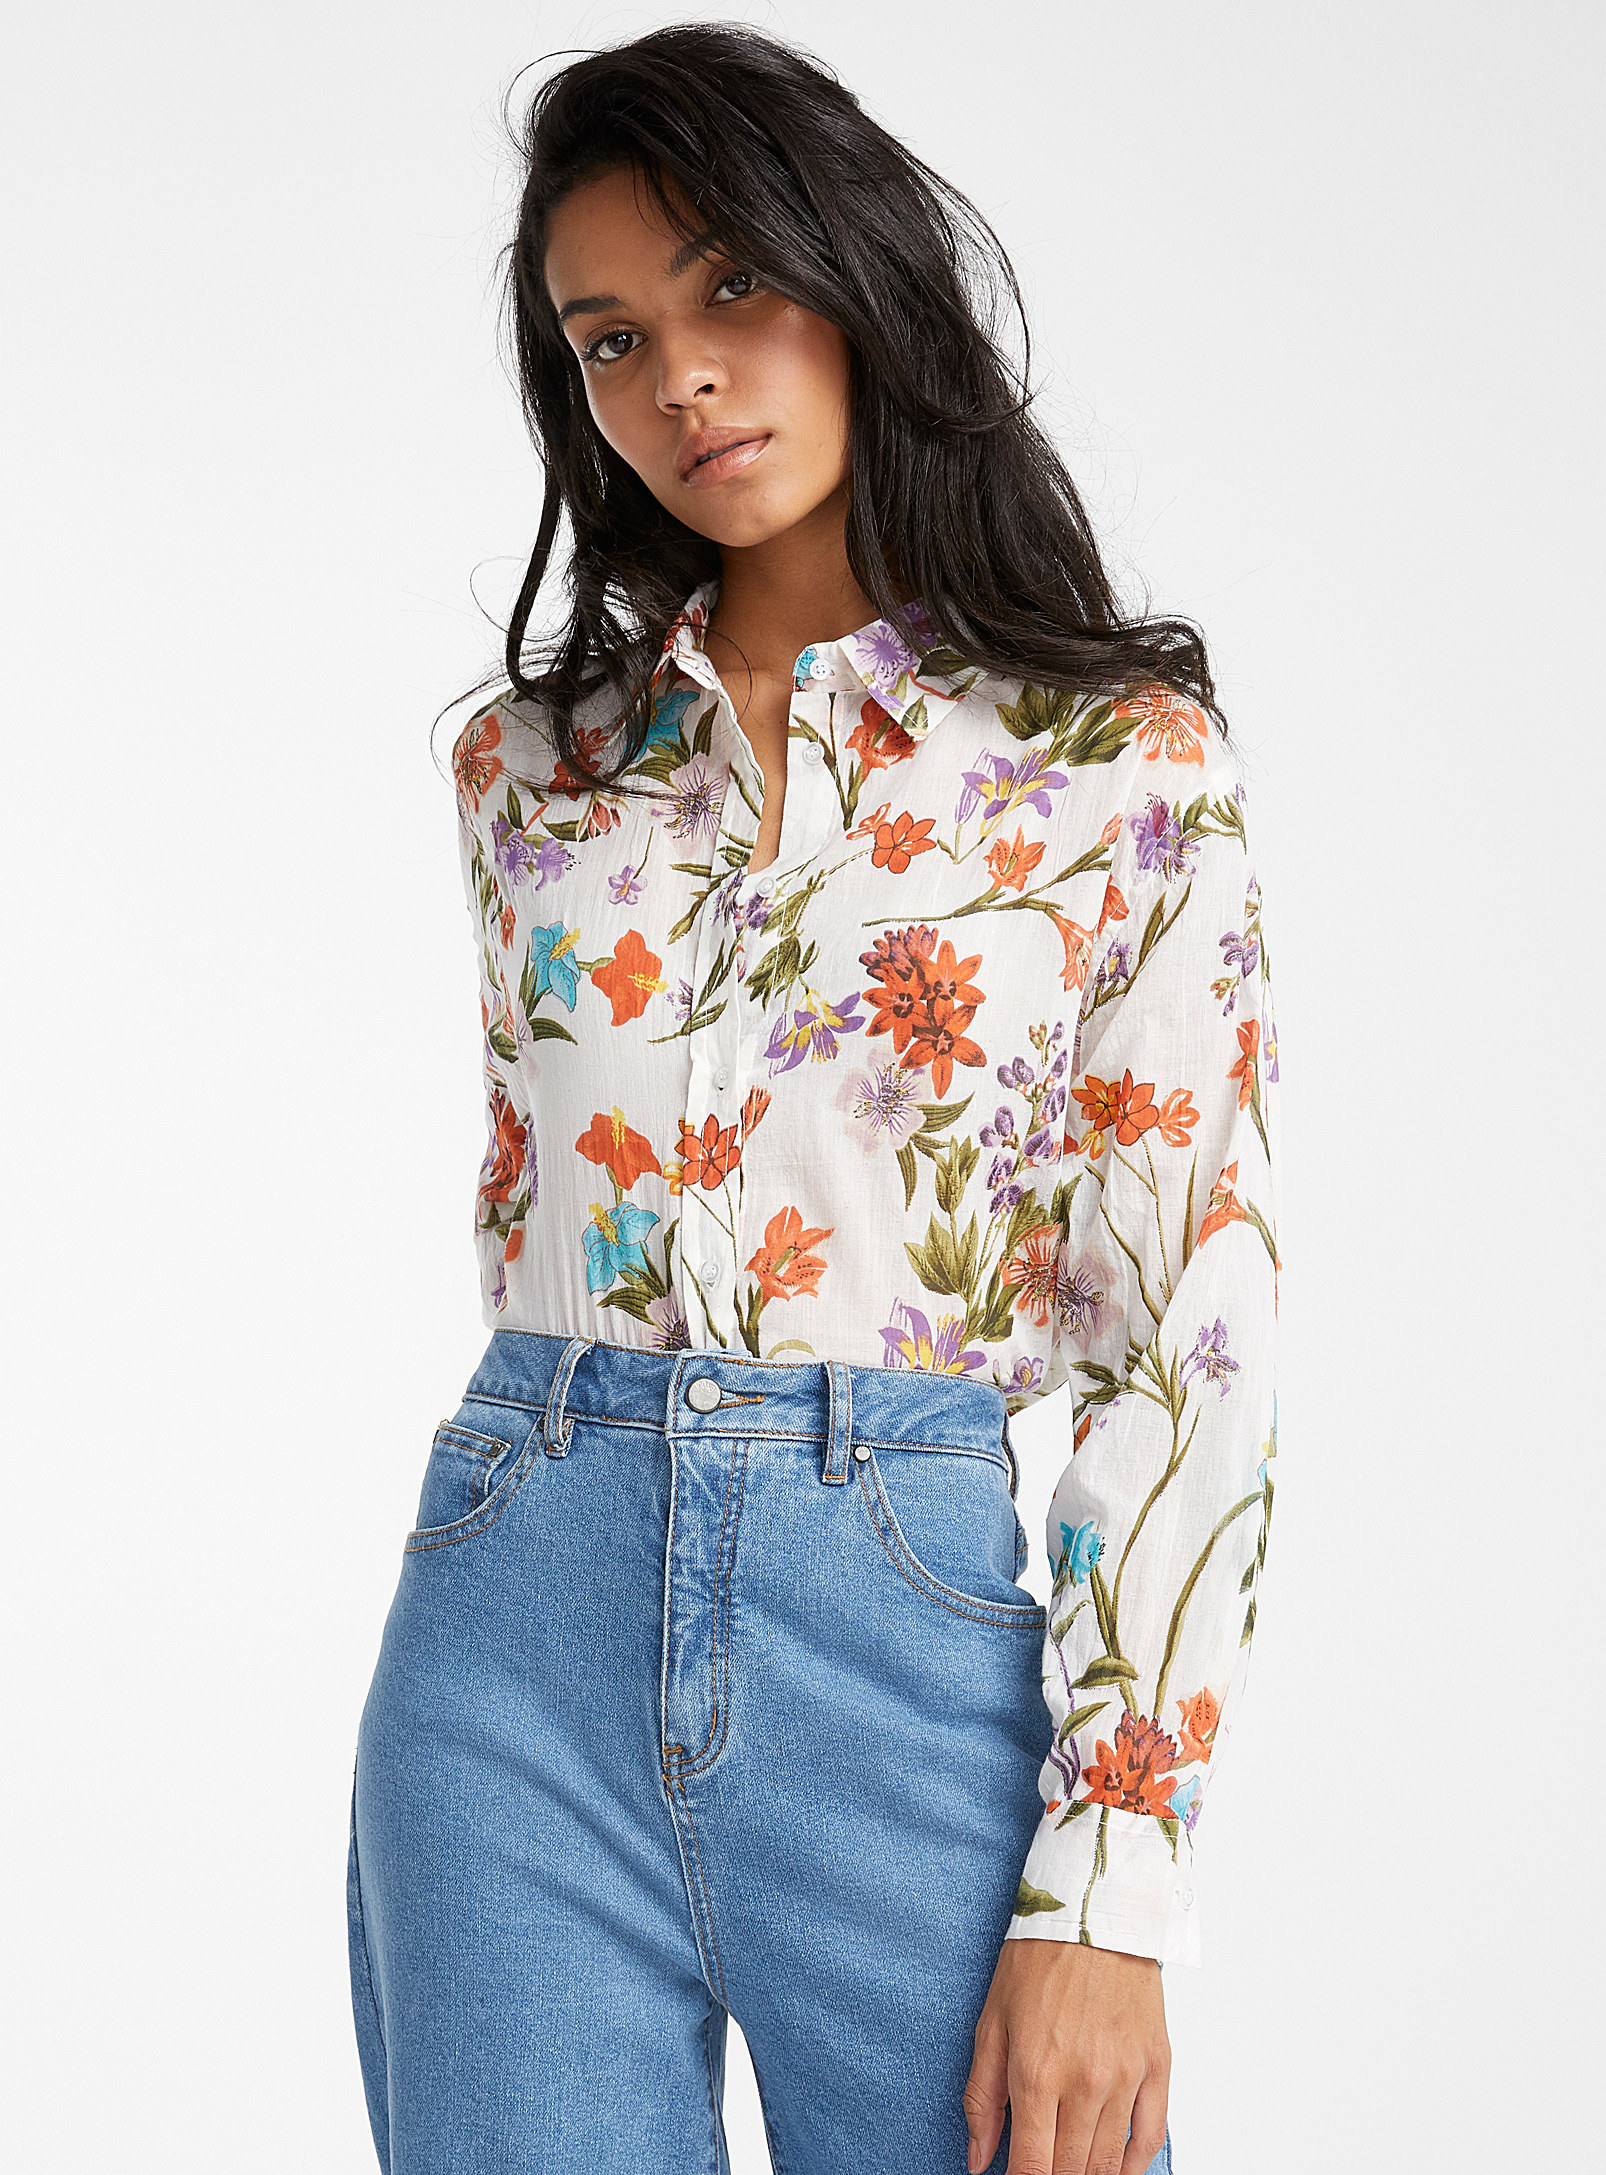 A person wearing the floral button up tucked into jeans 